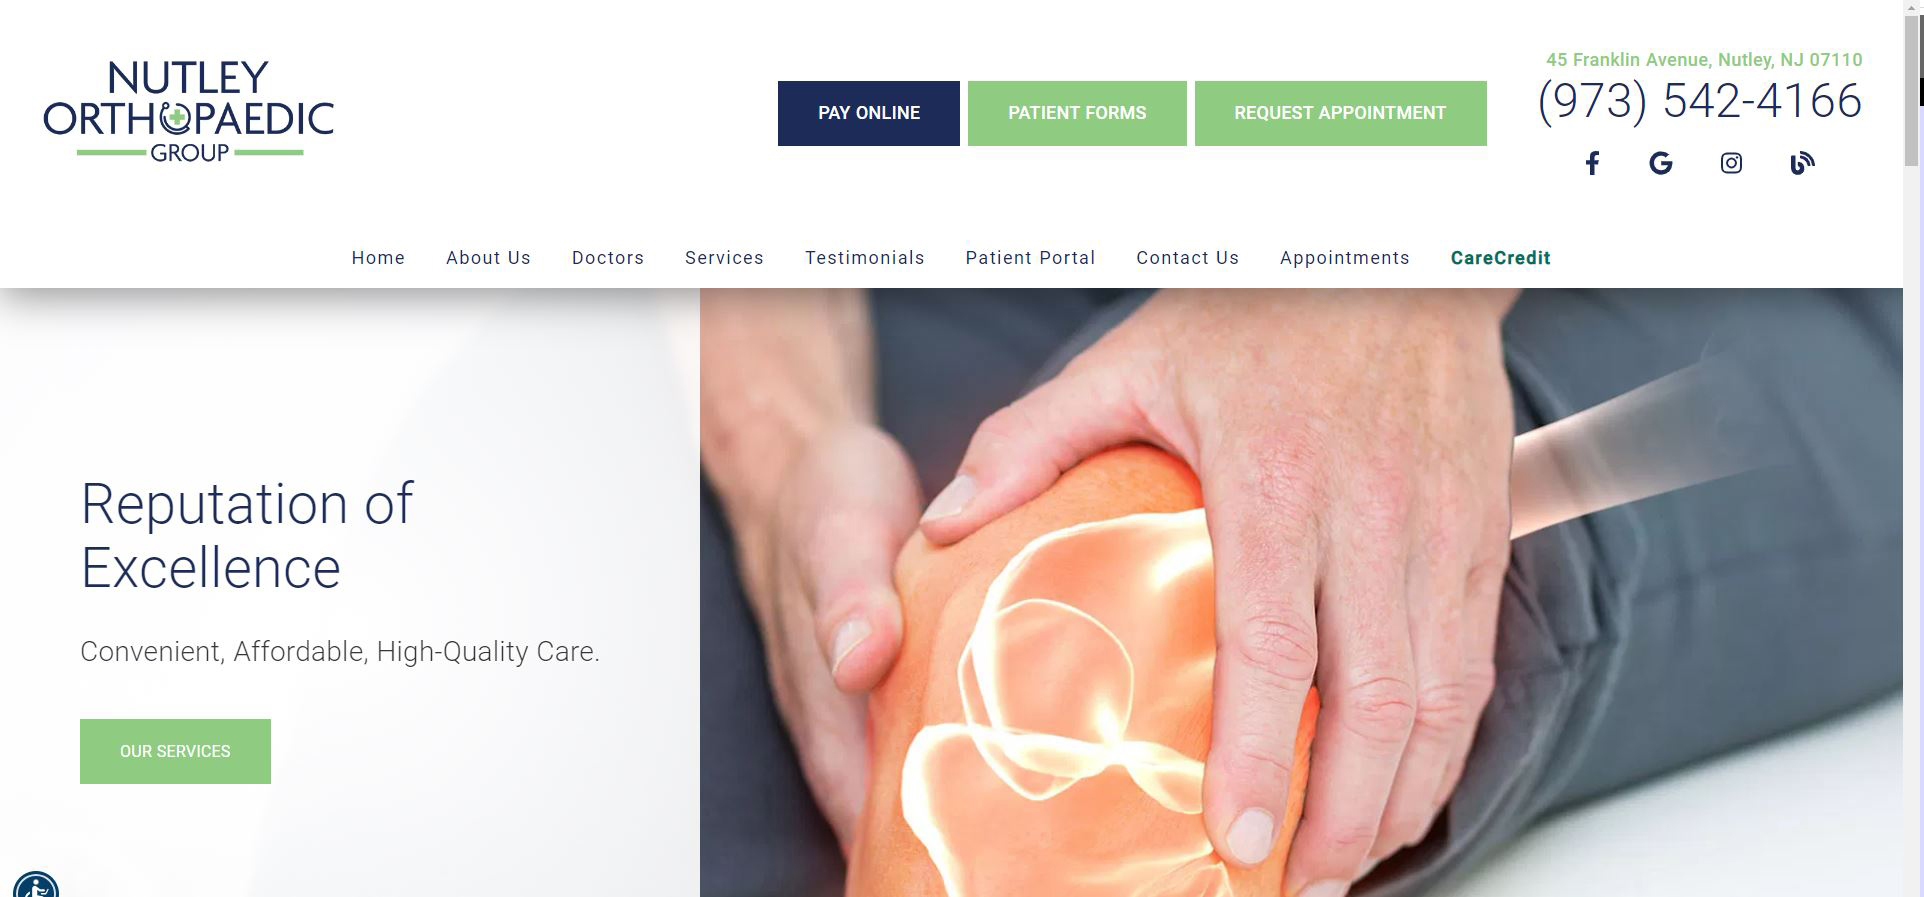 The image is a screenshot of a webpage with a photograph of a person s hands holding an object that appears to be a model of a human body, specifically focusing on the lower extremity.